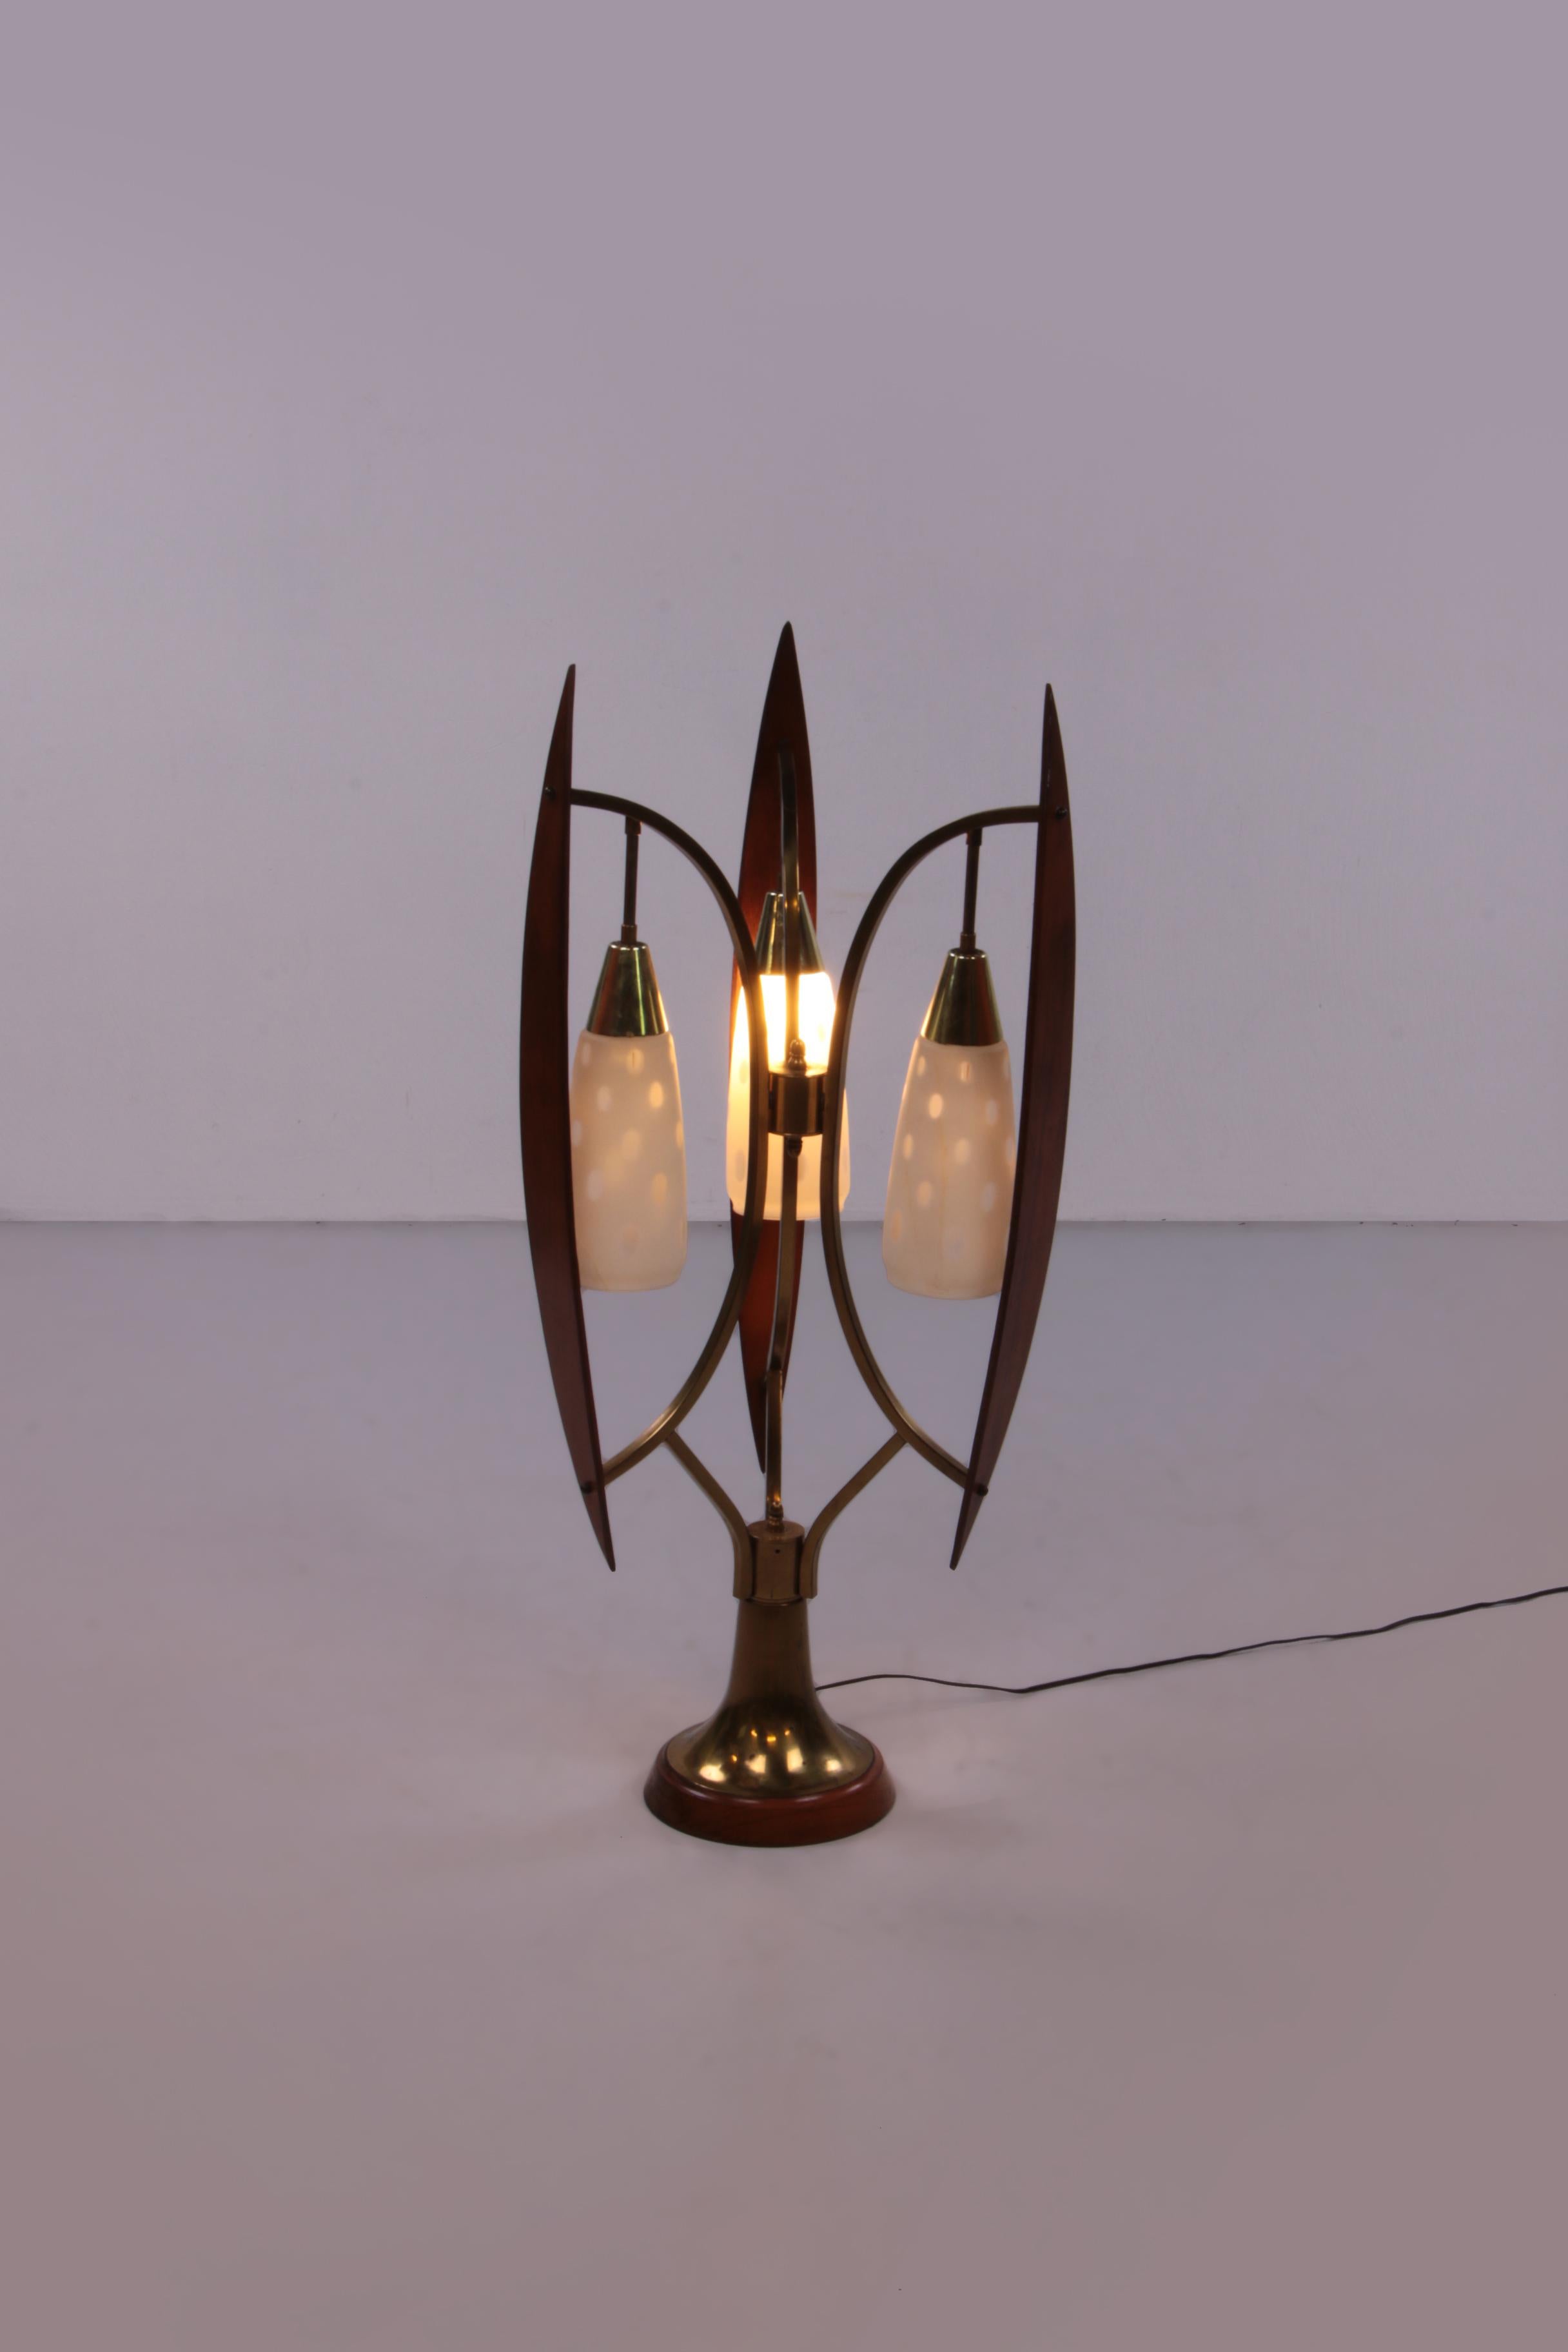 floor lamps with glass shades